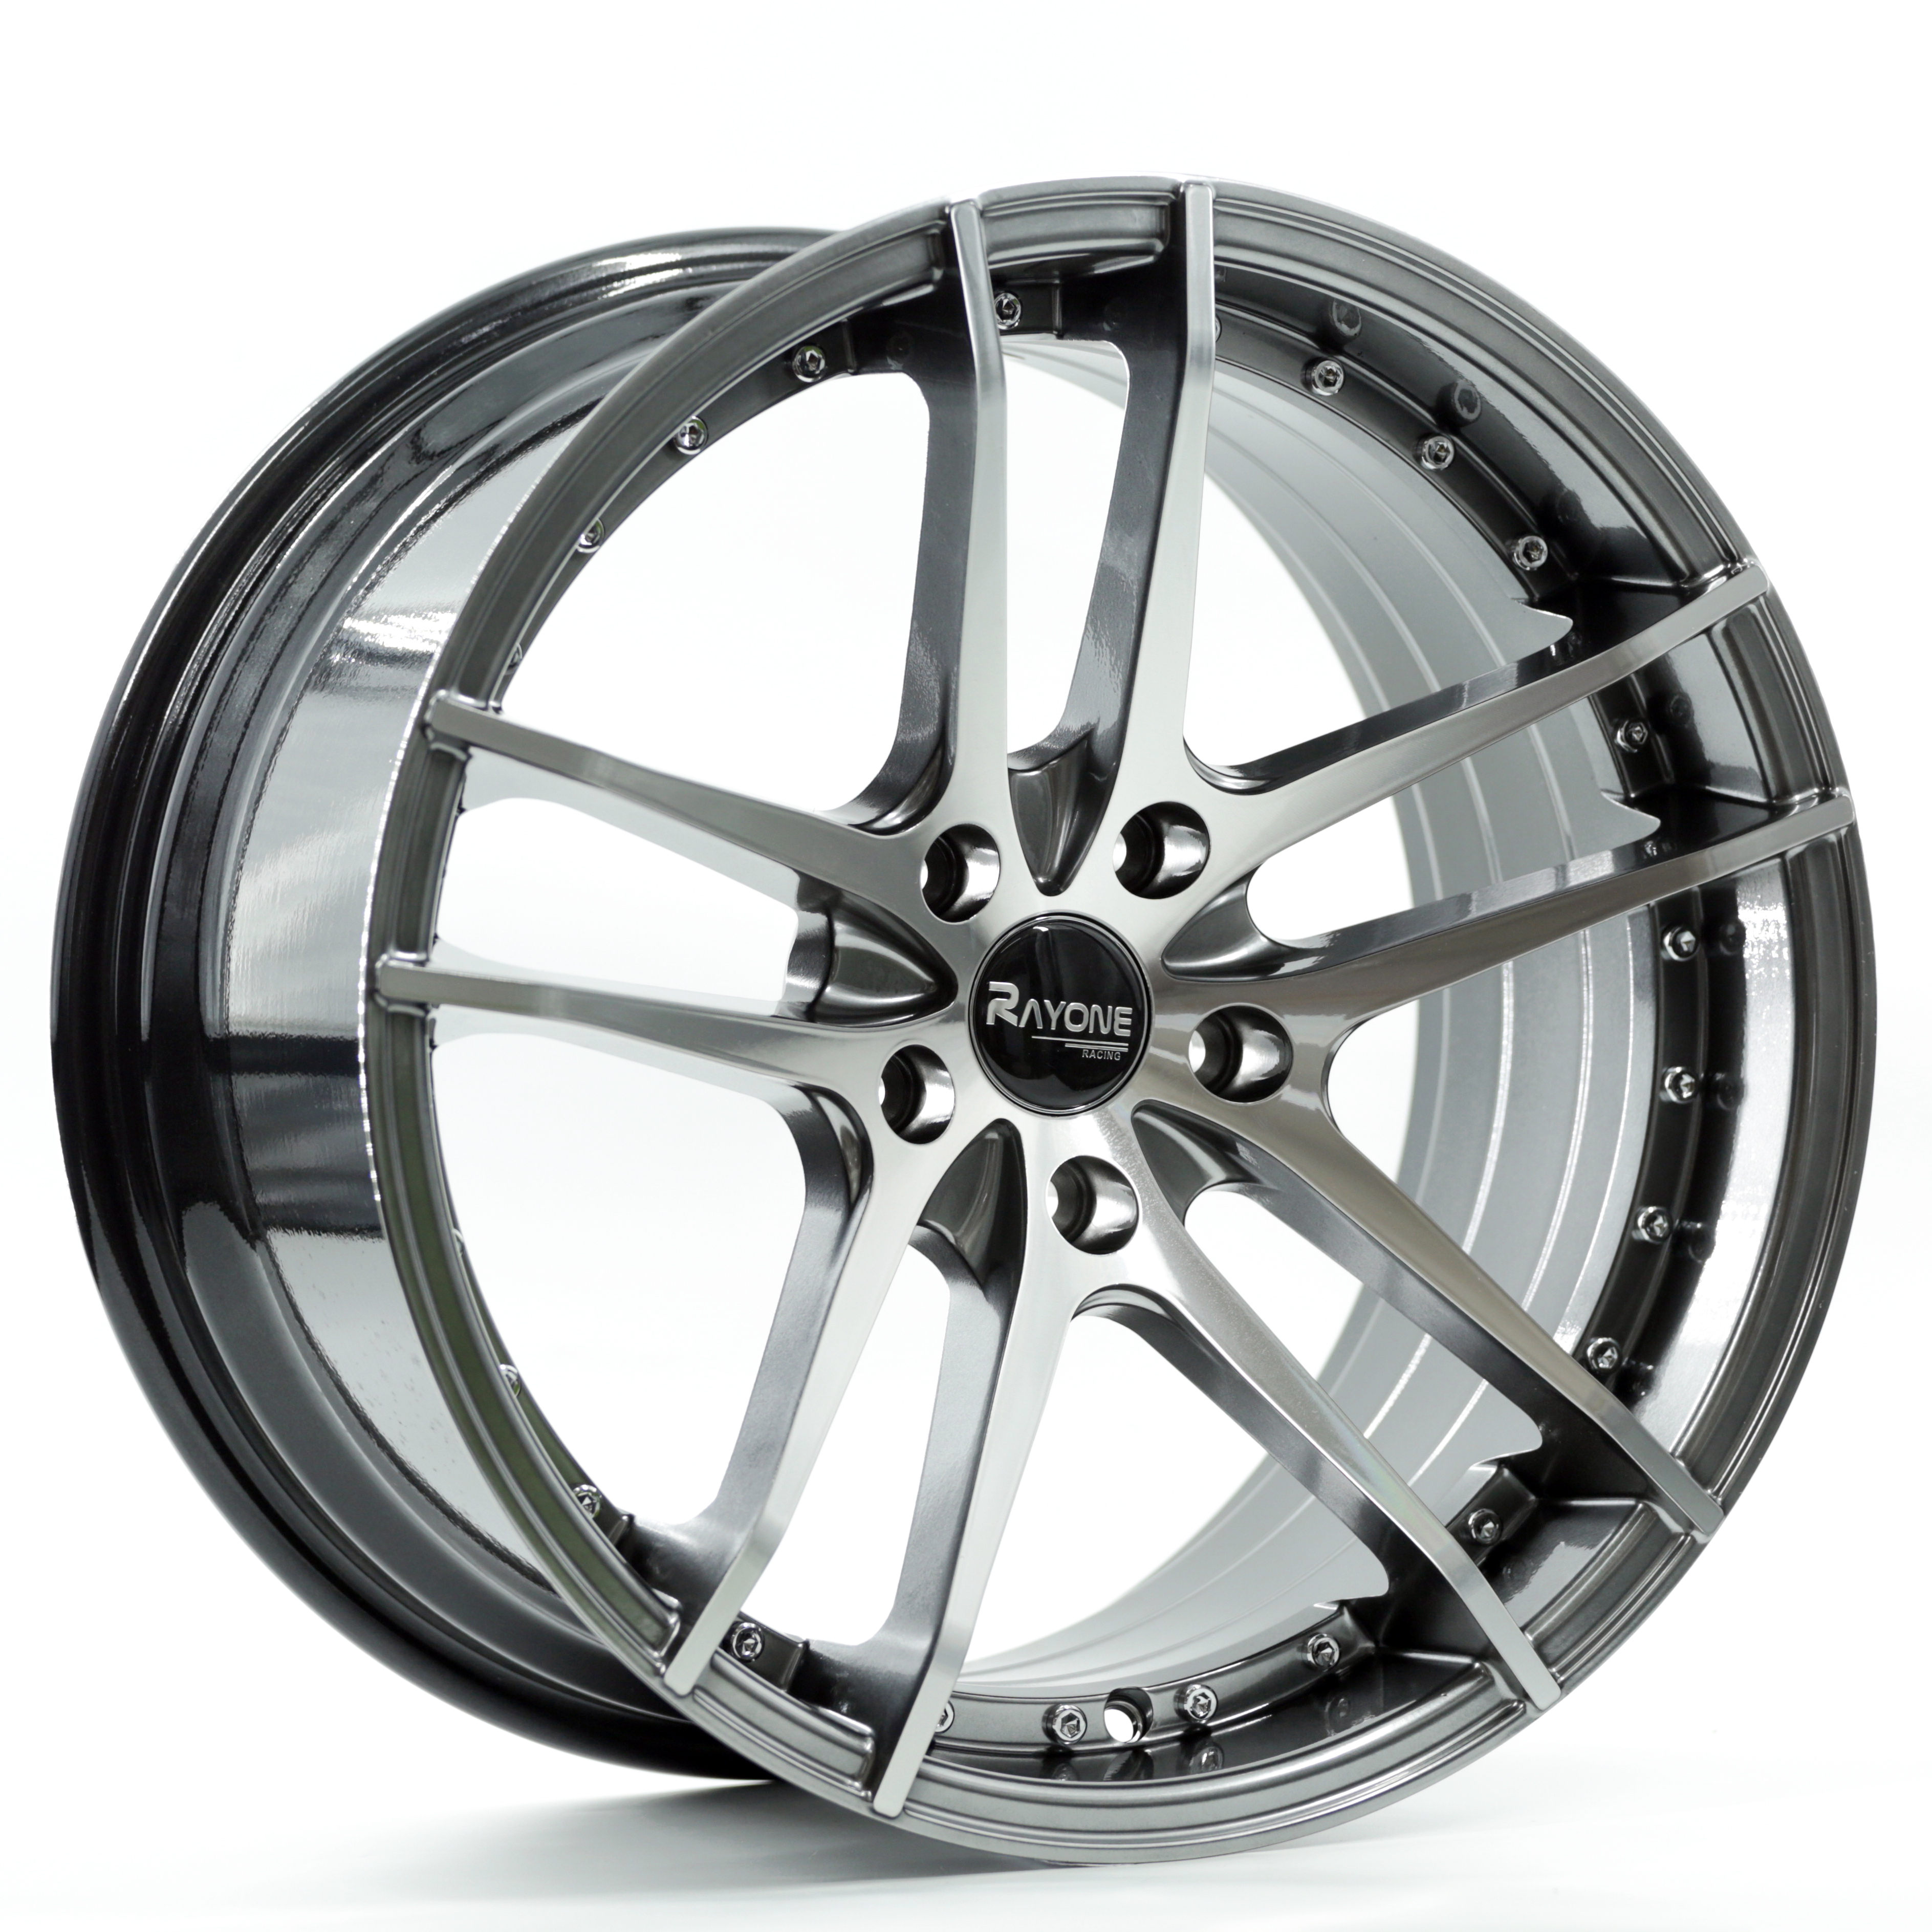 Rayone Alloy Wheels Factory KS Forged Wheels 18inch For Passenger Car